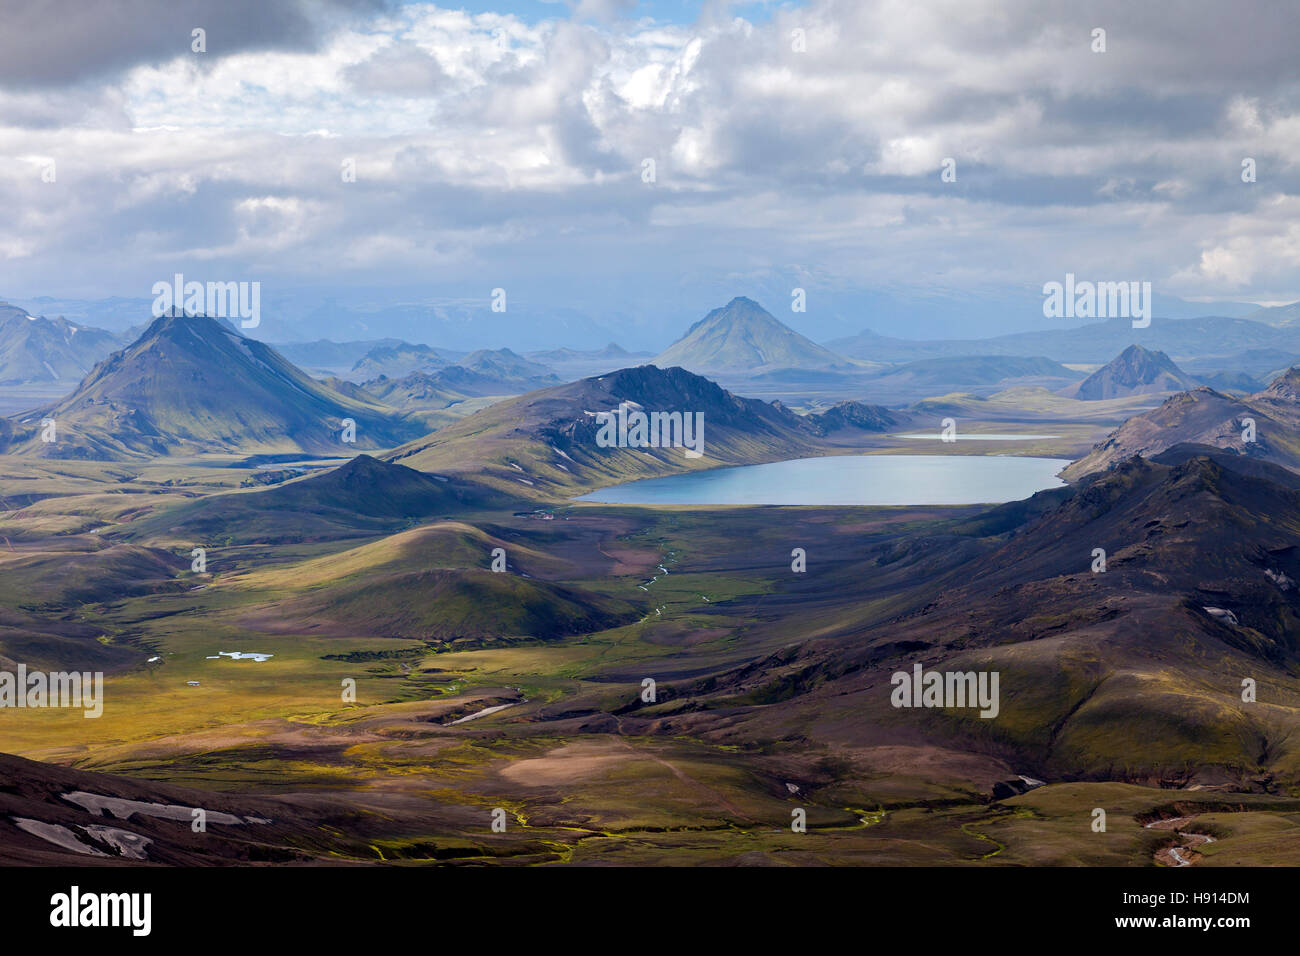 The Lake of Alftavatn Viewed From the Upper Slopes of Jokultungur on the  Laugavegur Hiking Trail Iceland Stock Photo - Alamy